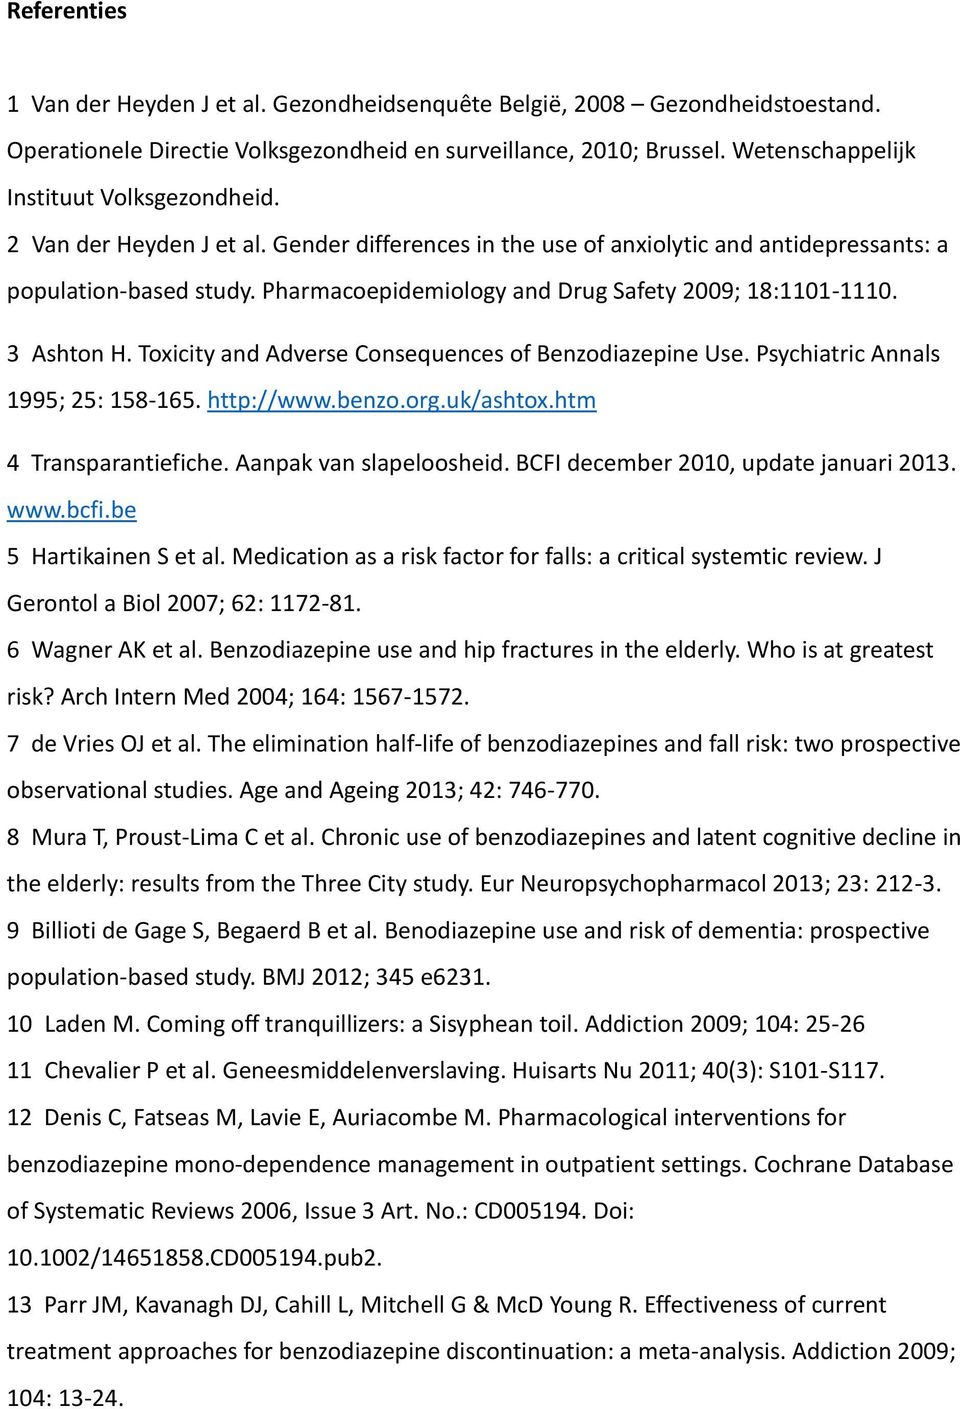 Pharmacoepidemiology and Drug Safety 2009; 18:1101-1110. 3 Ashton H. Toxicity and Adverse Consequences of Benzodiazepine Use. Psychiatric Annals 1995; 25: 158-165. http://www.benzo.org.uk/ashtox.